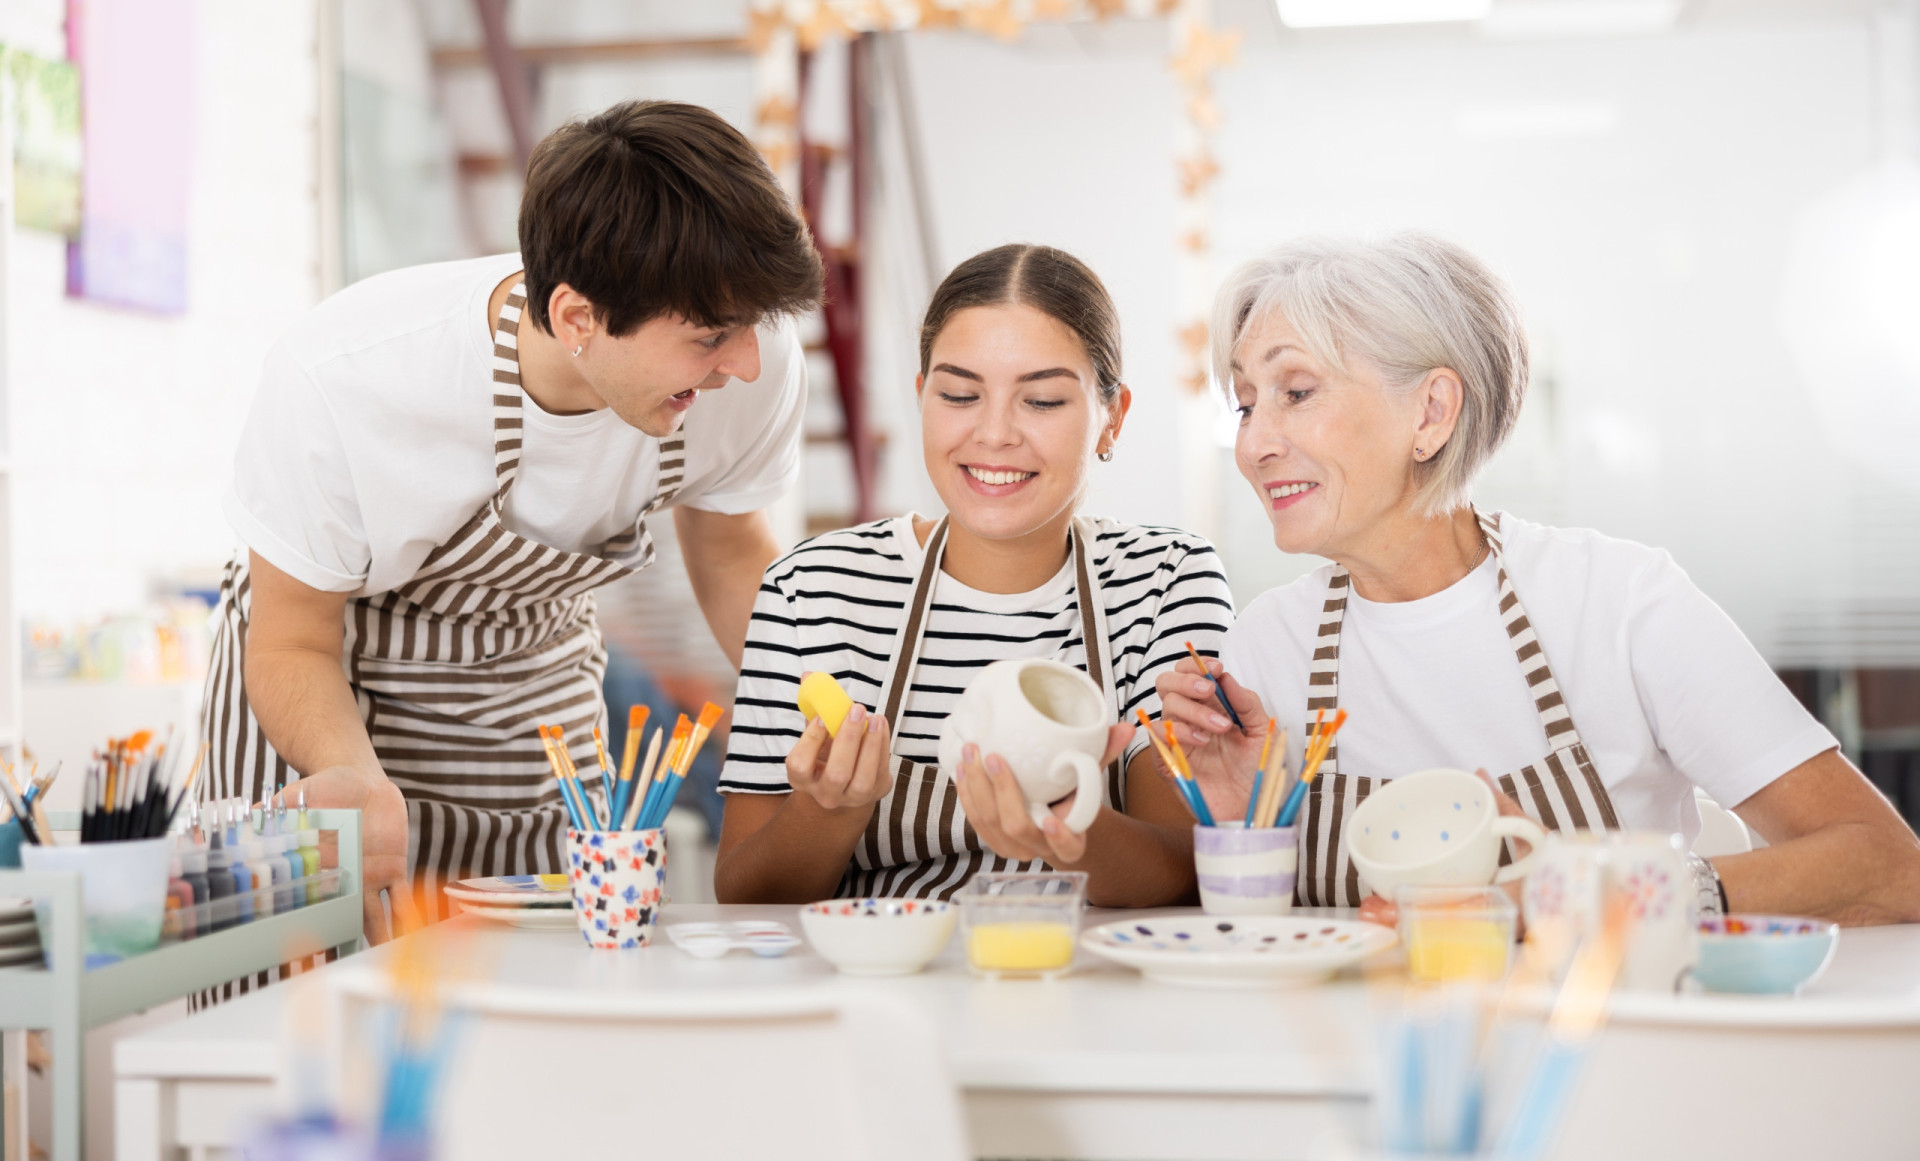 <p>Creating works of art together can bring families closer. Take mom to an art class (think pottery or painting) and enjoy spending time together while exploring your artistic side.</p><p>You may also like:<a href="https://www.starsinsider.com/n/486453?utm_source=msn.com&utm_medium=display&utm_campaign=referral_description&utm_content=708861en-us"> Historical massacres that shocked the world</a></p>